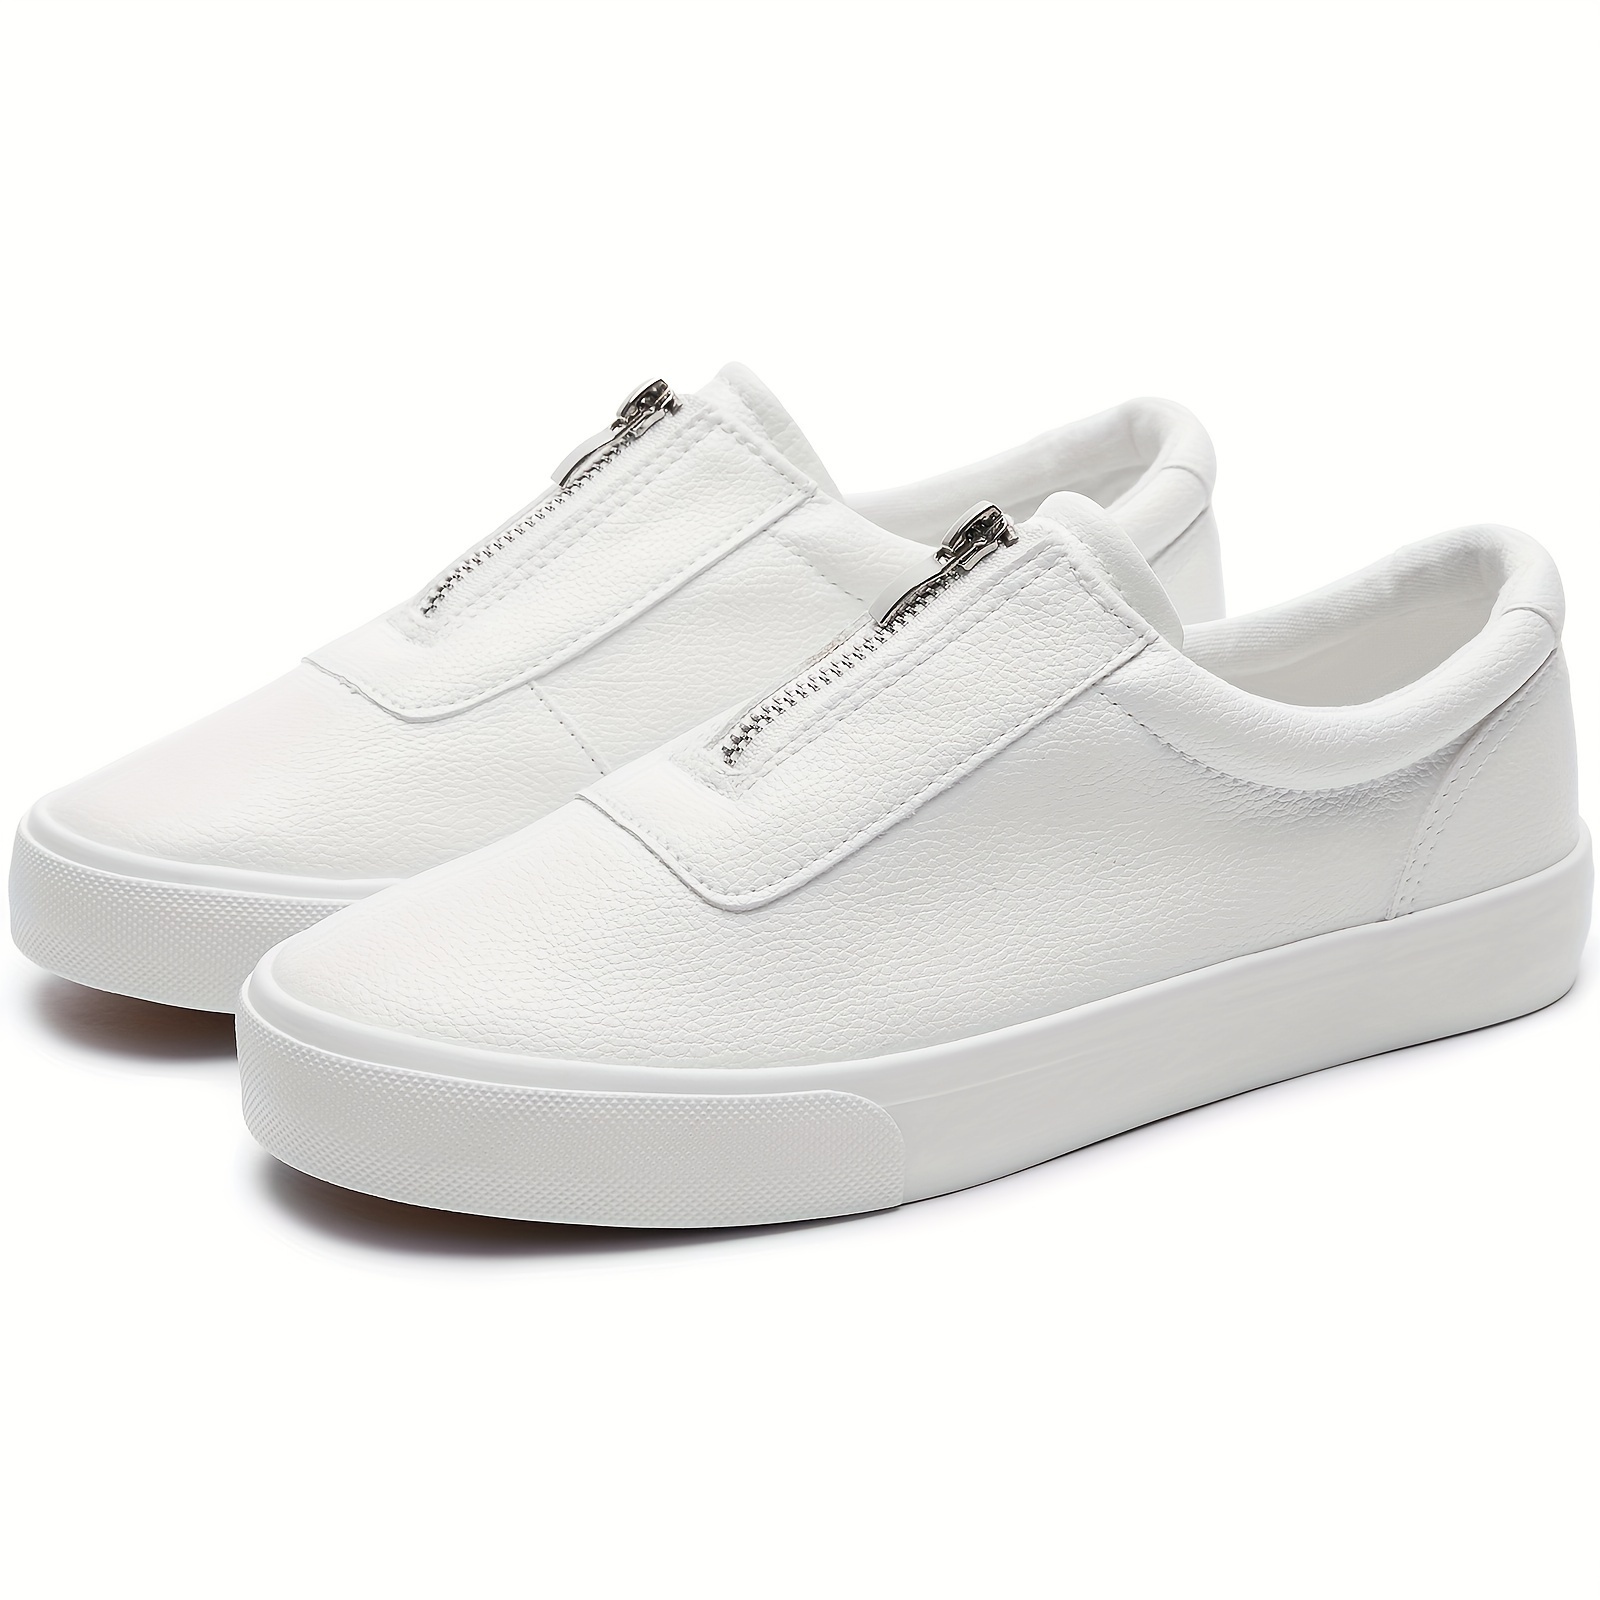 

Women's Fashion Slip-on Sneakers, Casual Pu Leather Comfortable Loafers, White Flat Shoes With Zipper Detail